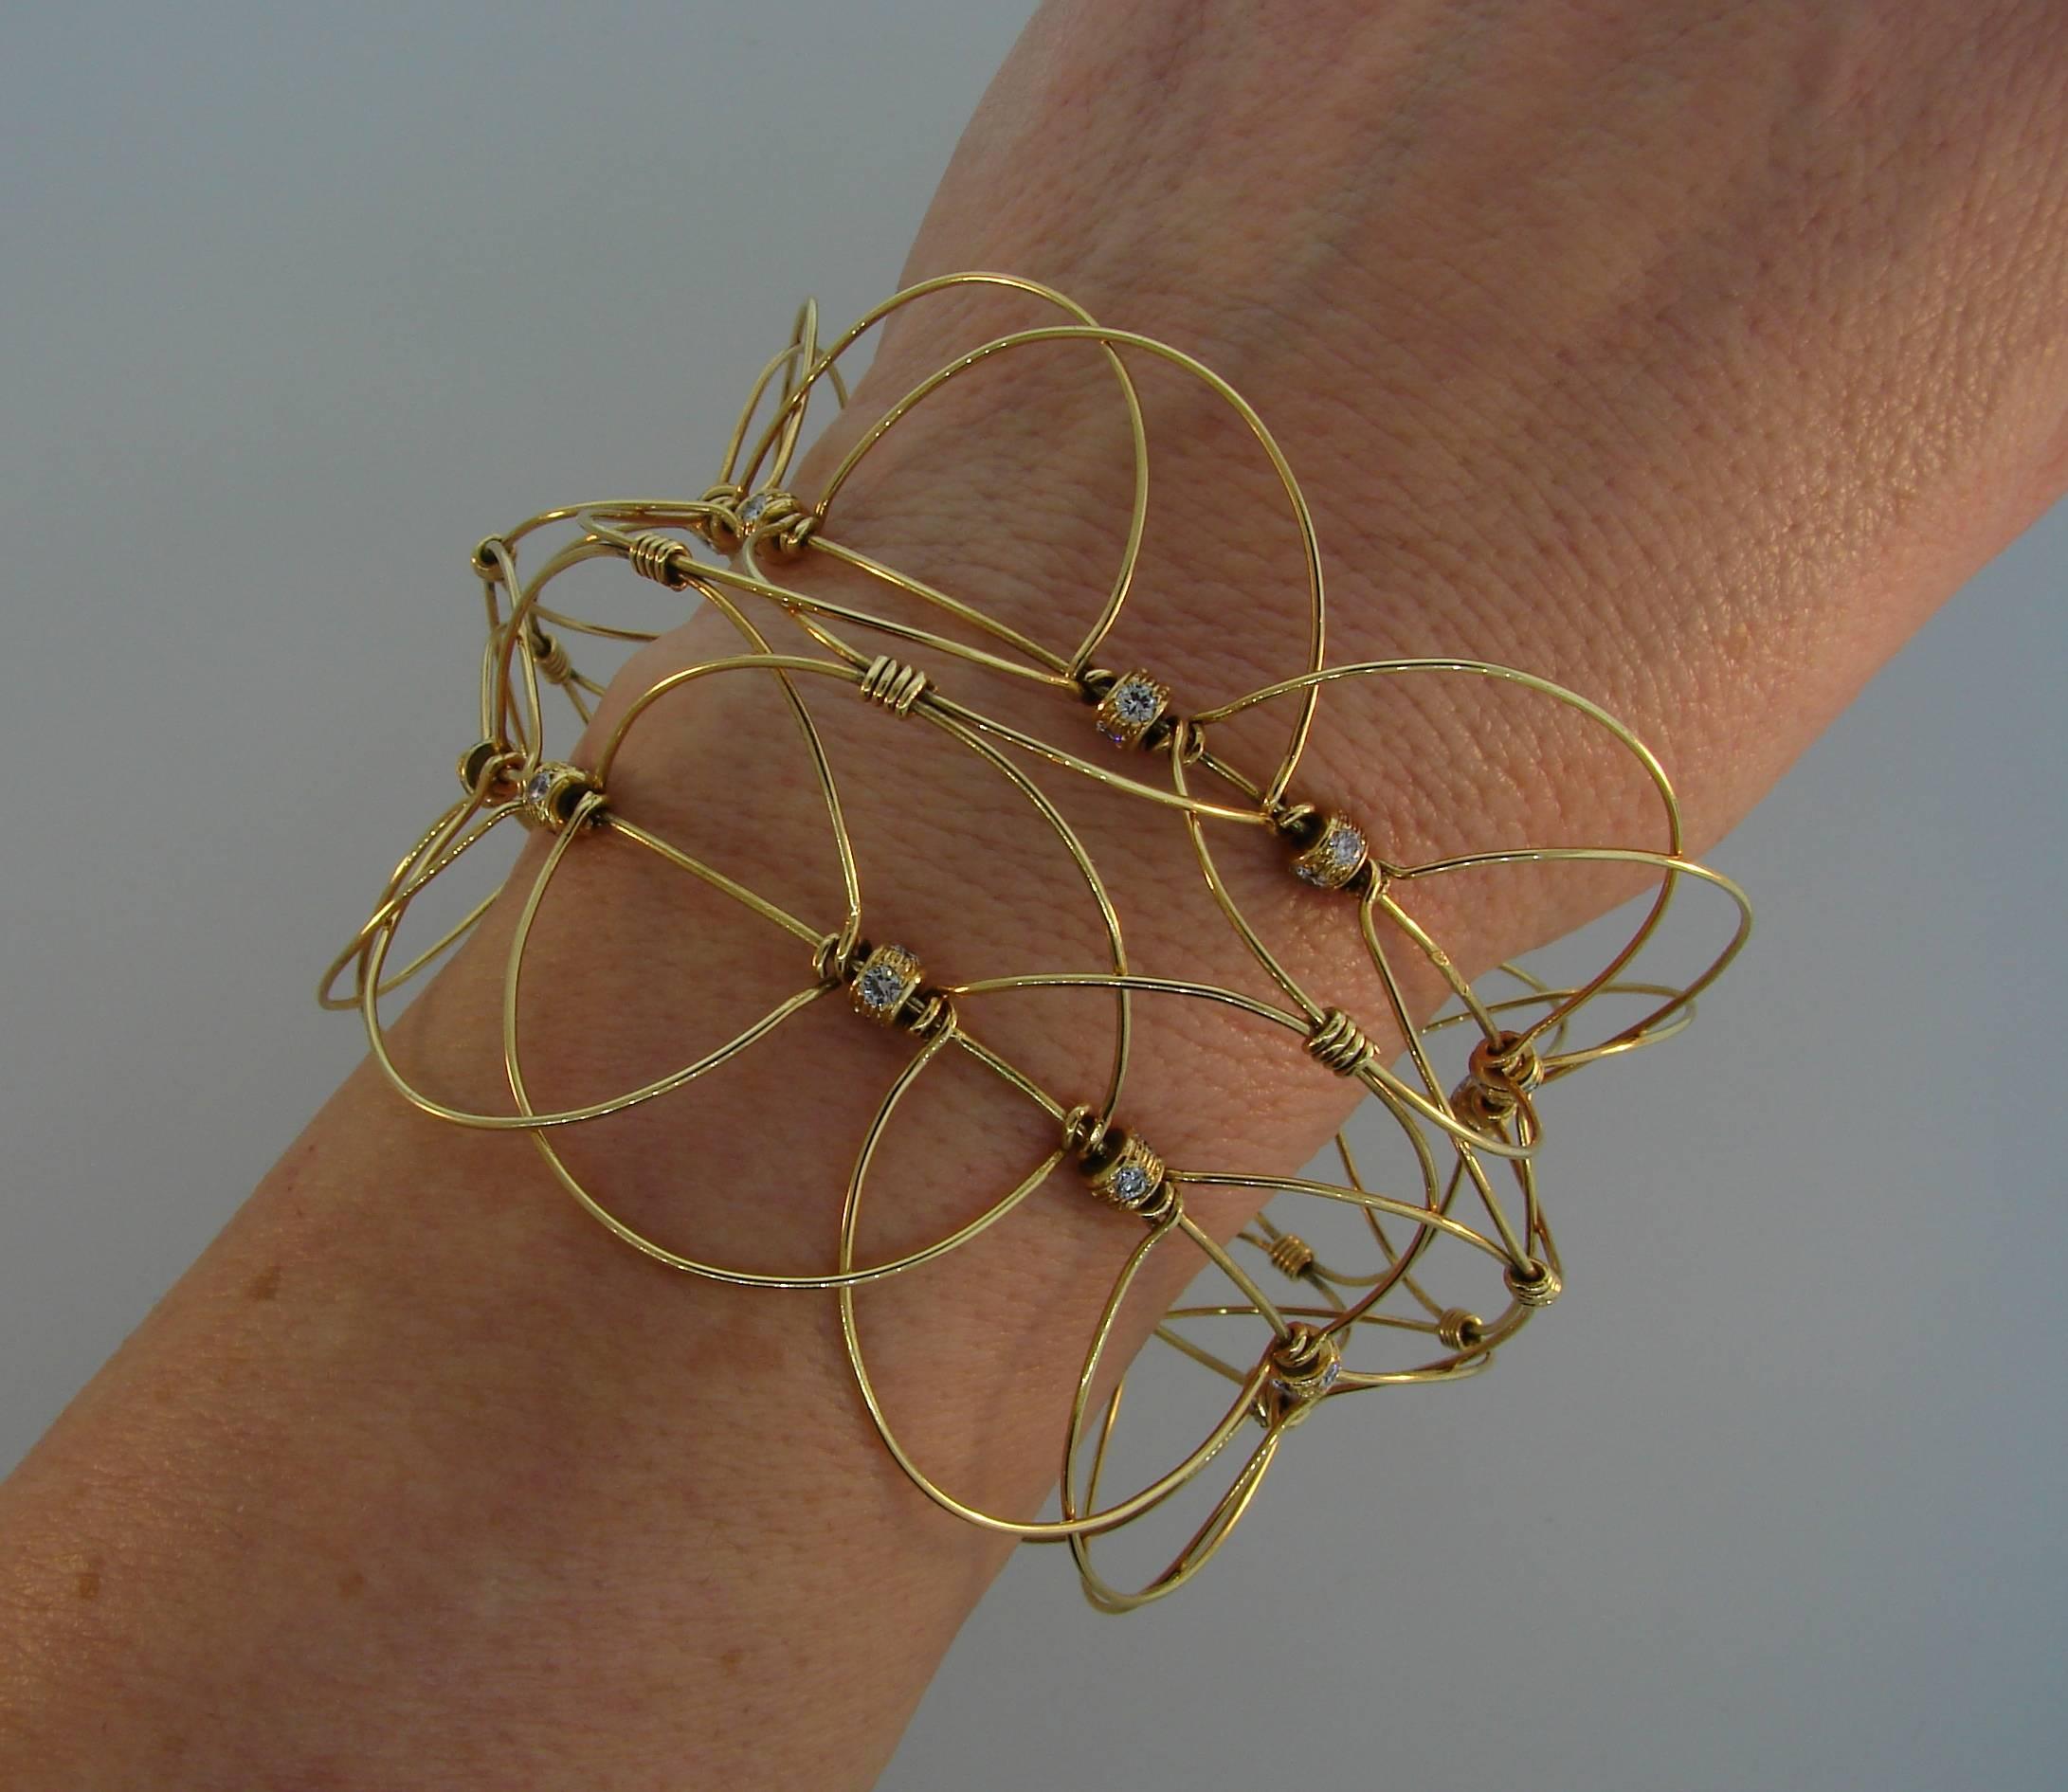 Fun and unusual openwork bracelet that can be worn in many different ways.Versatile and wearable, the bangle is a great addition to your jewelry collection. 
Made of 14 karat (tested) yellow gold and set with approximately 3.20 carats of round